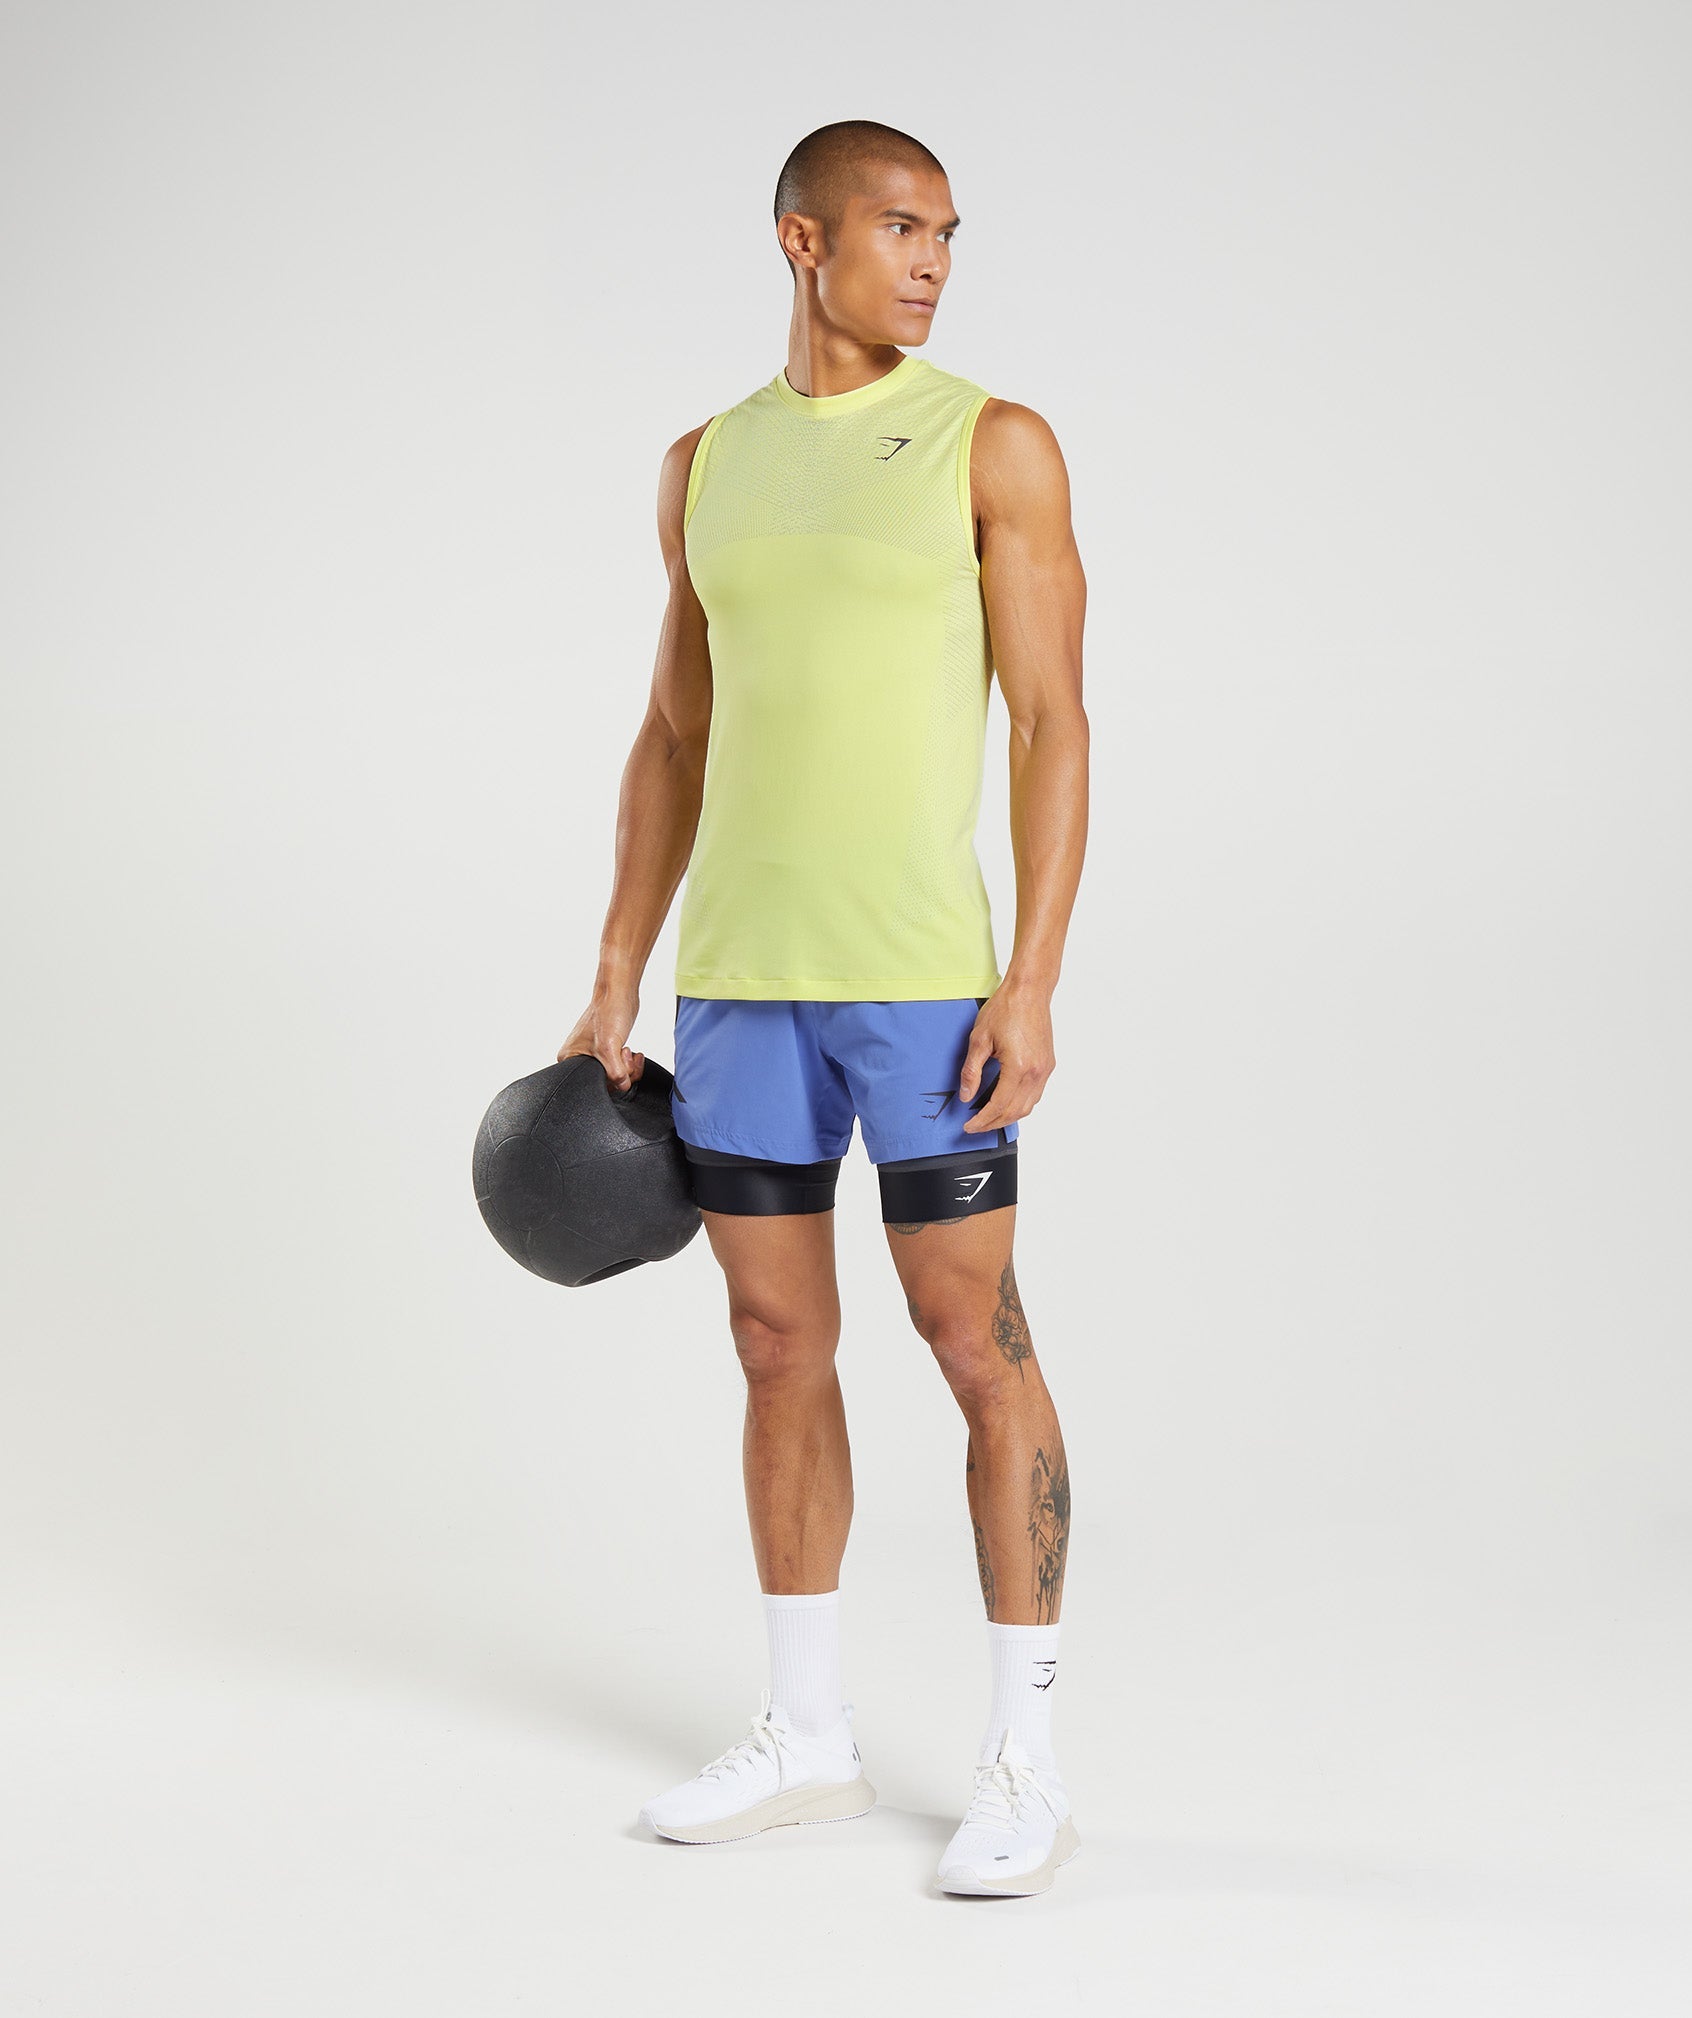 Apex Seamless Tank in Firefly Green/White - view 4